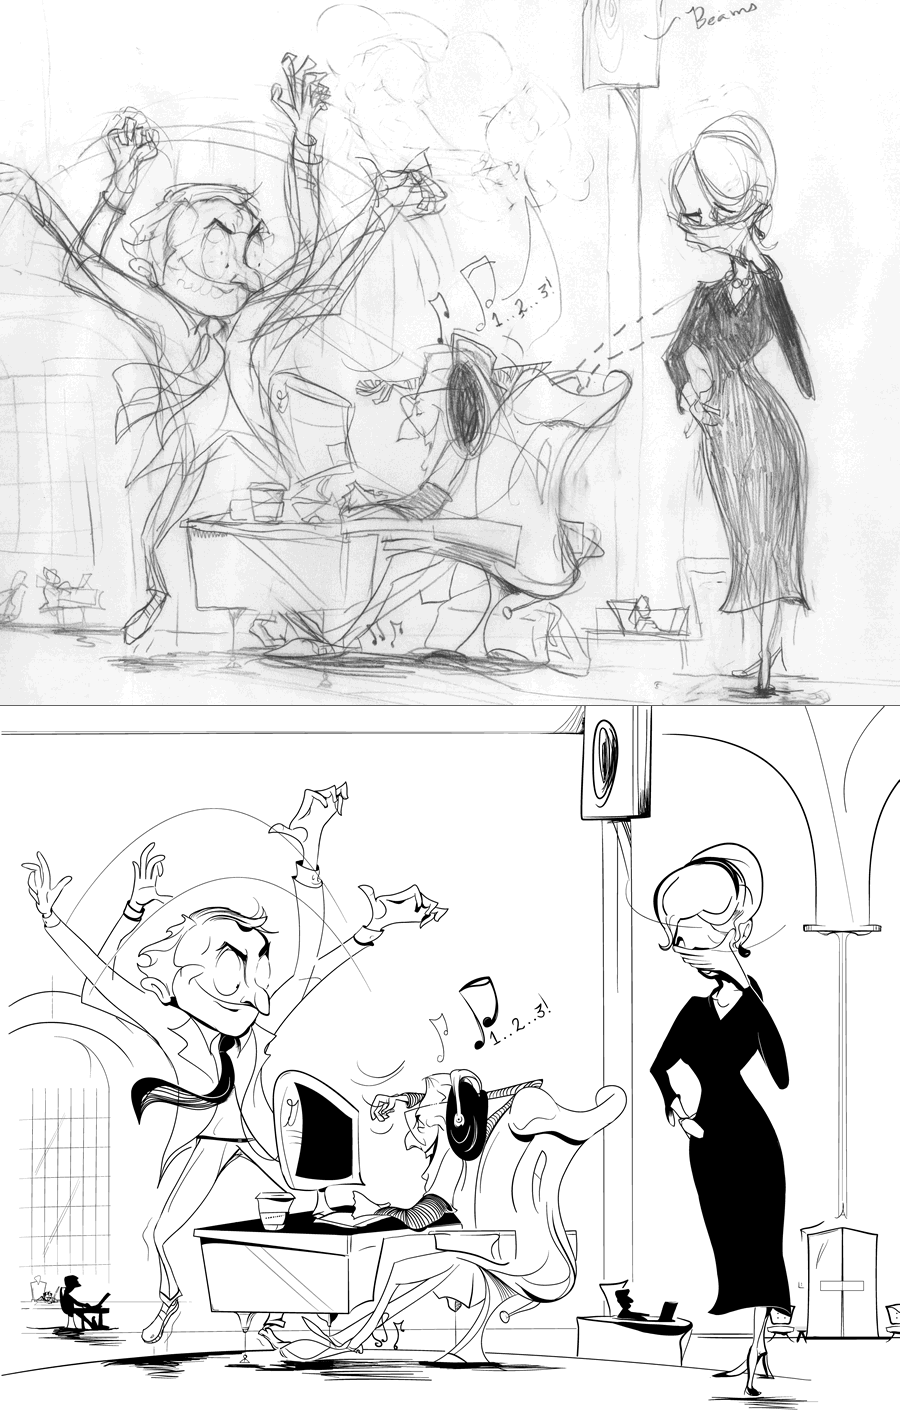 Two sketches show the before and after versions of Antony Hare's sketches and final product